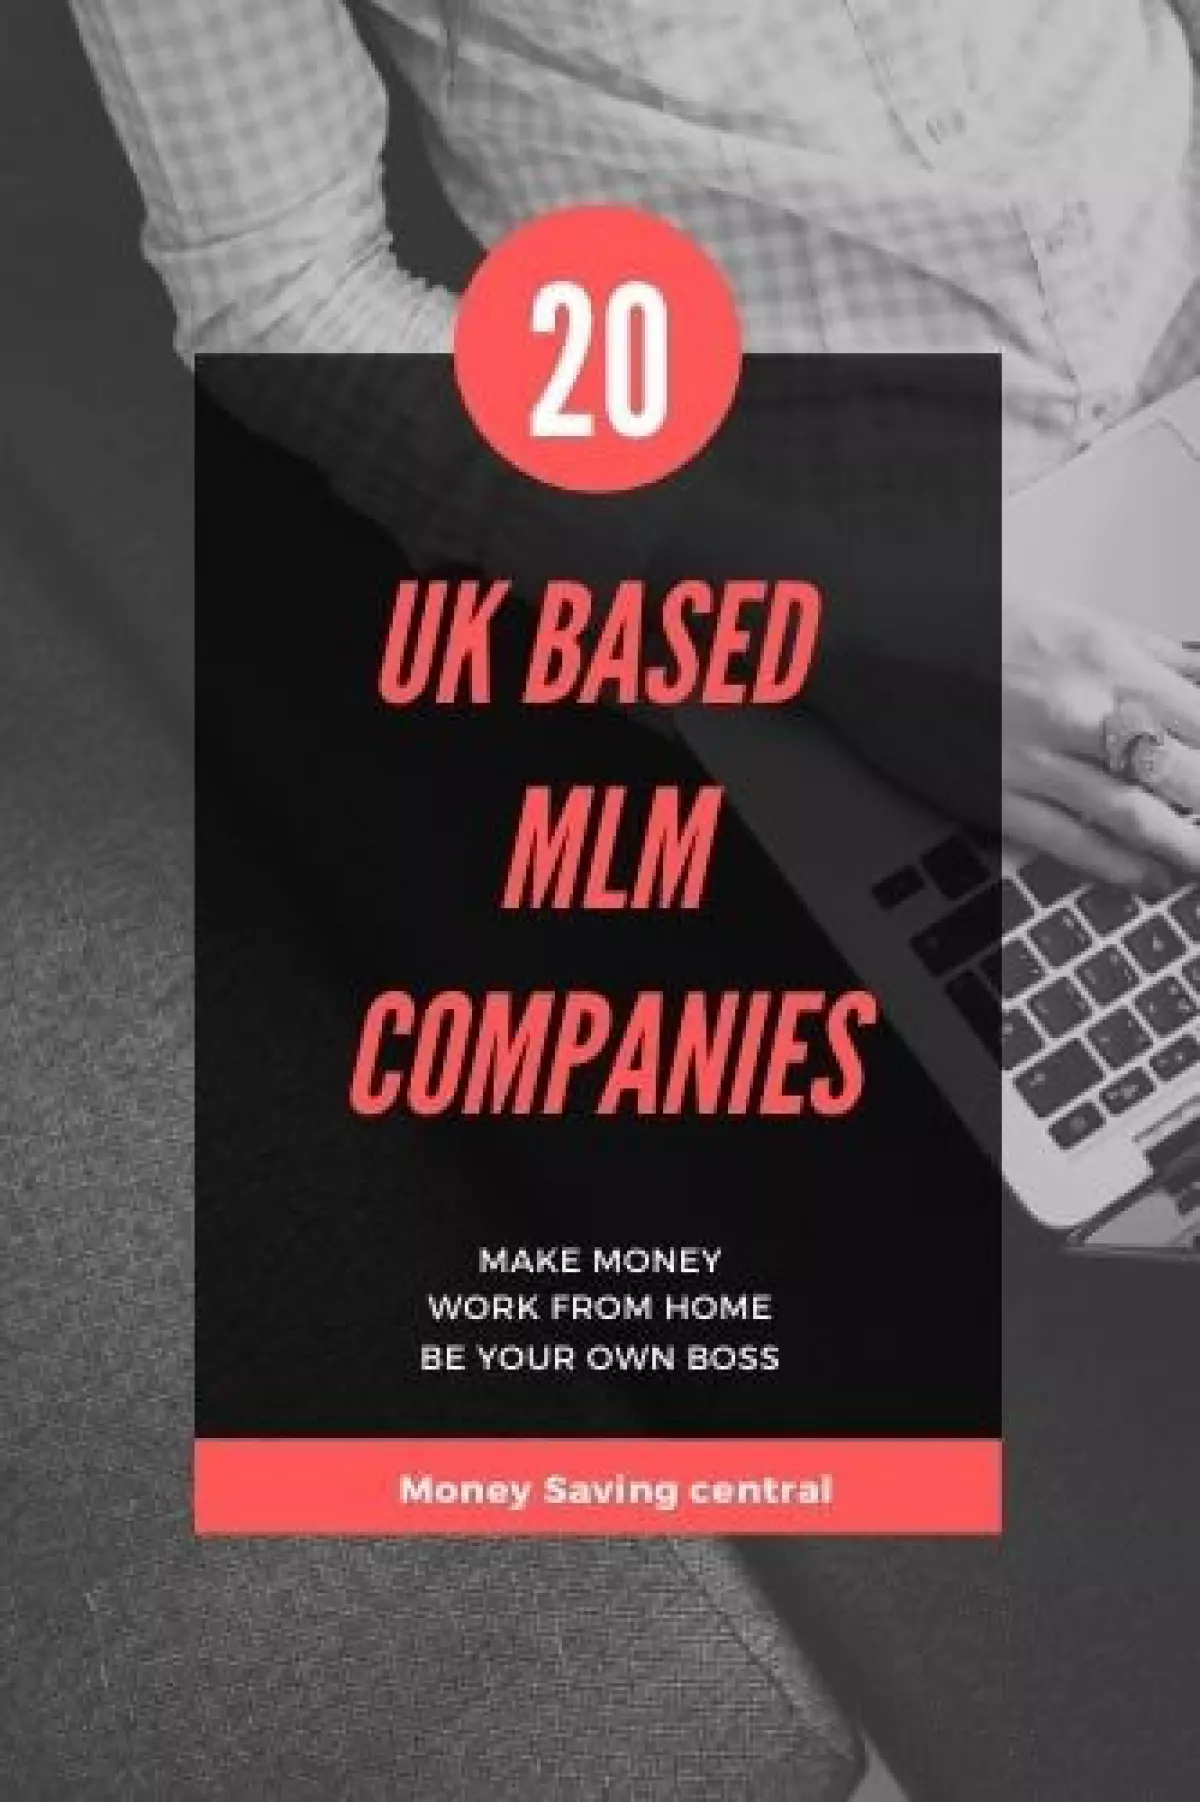 MLM Companies in the UK